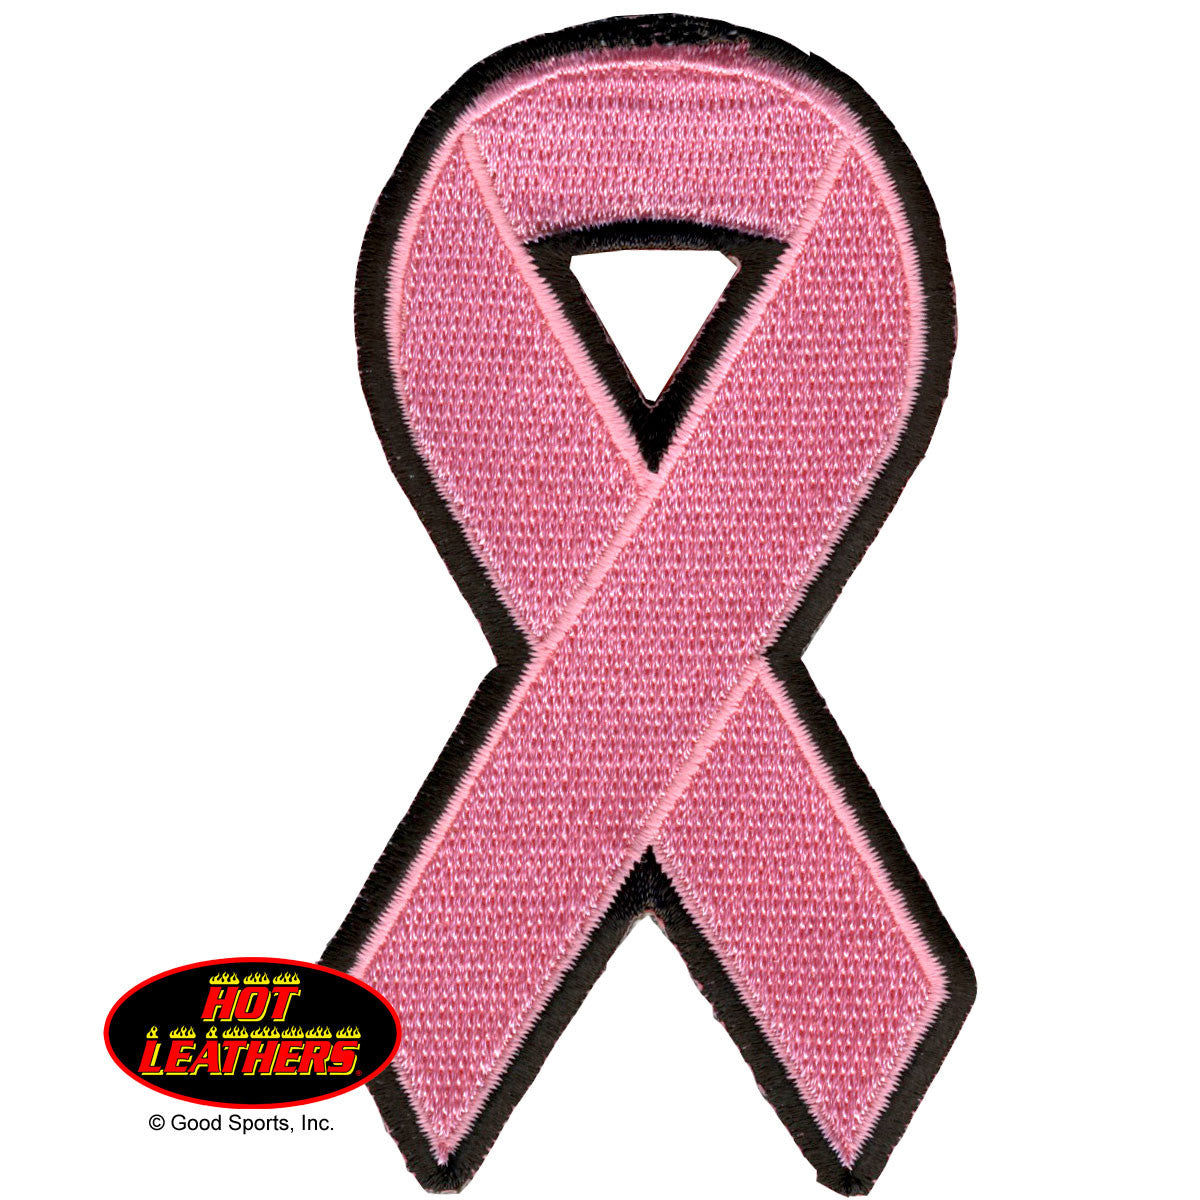 Cancer Awareness - Maine-Line Leather